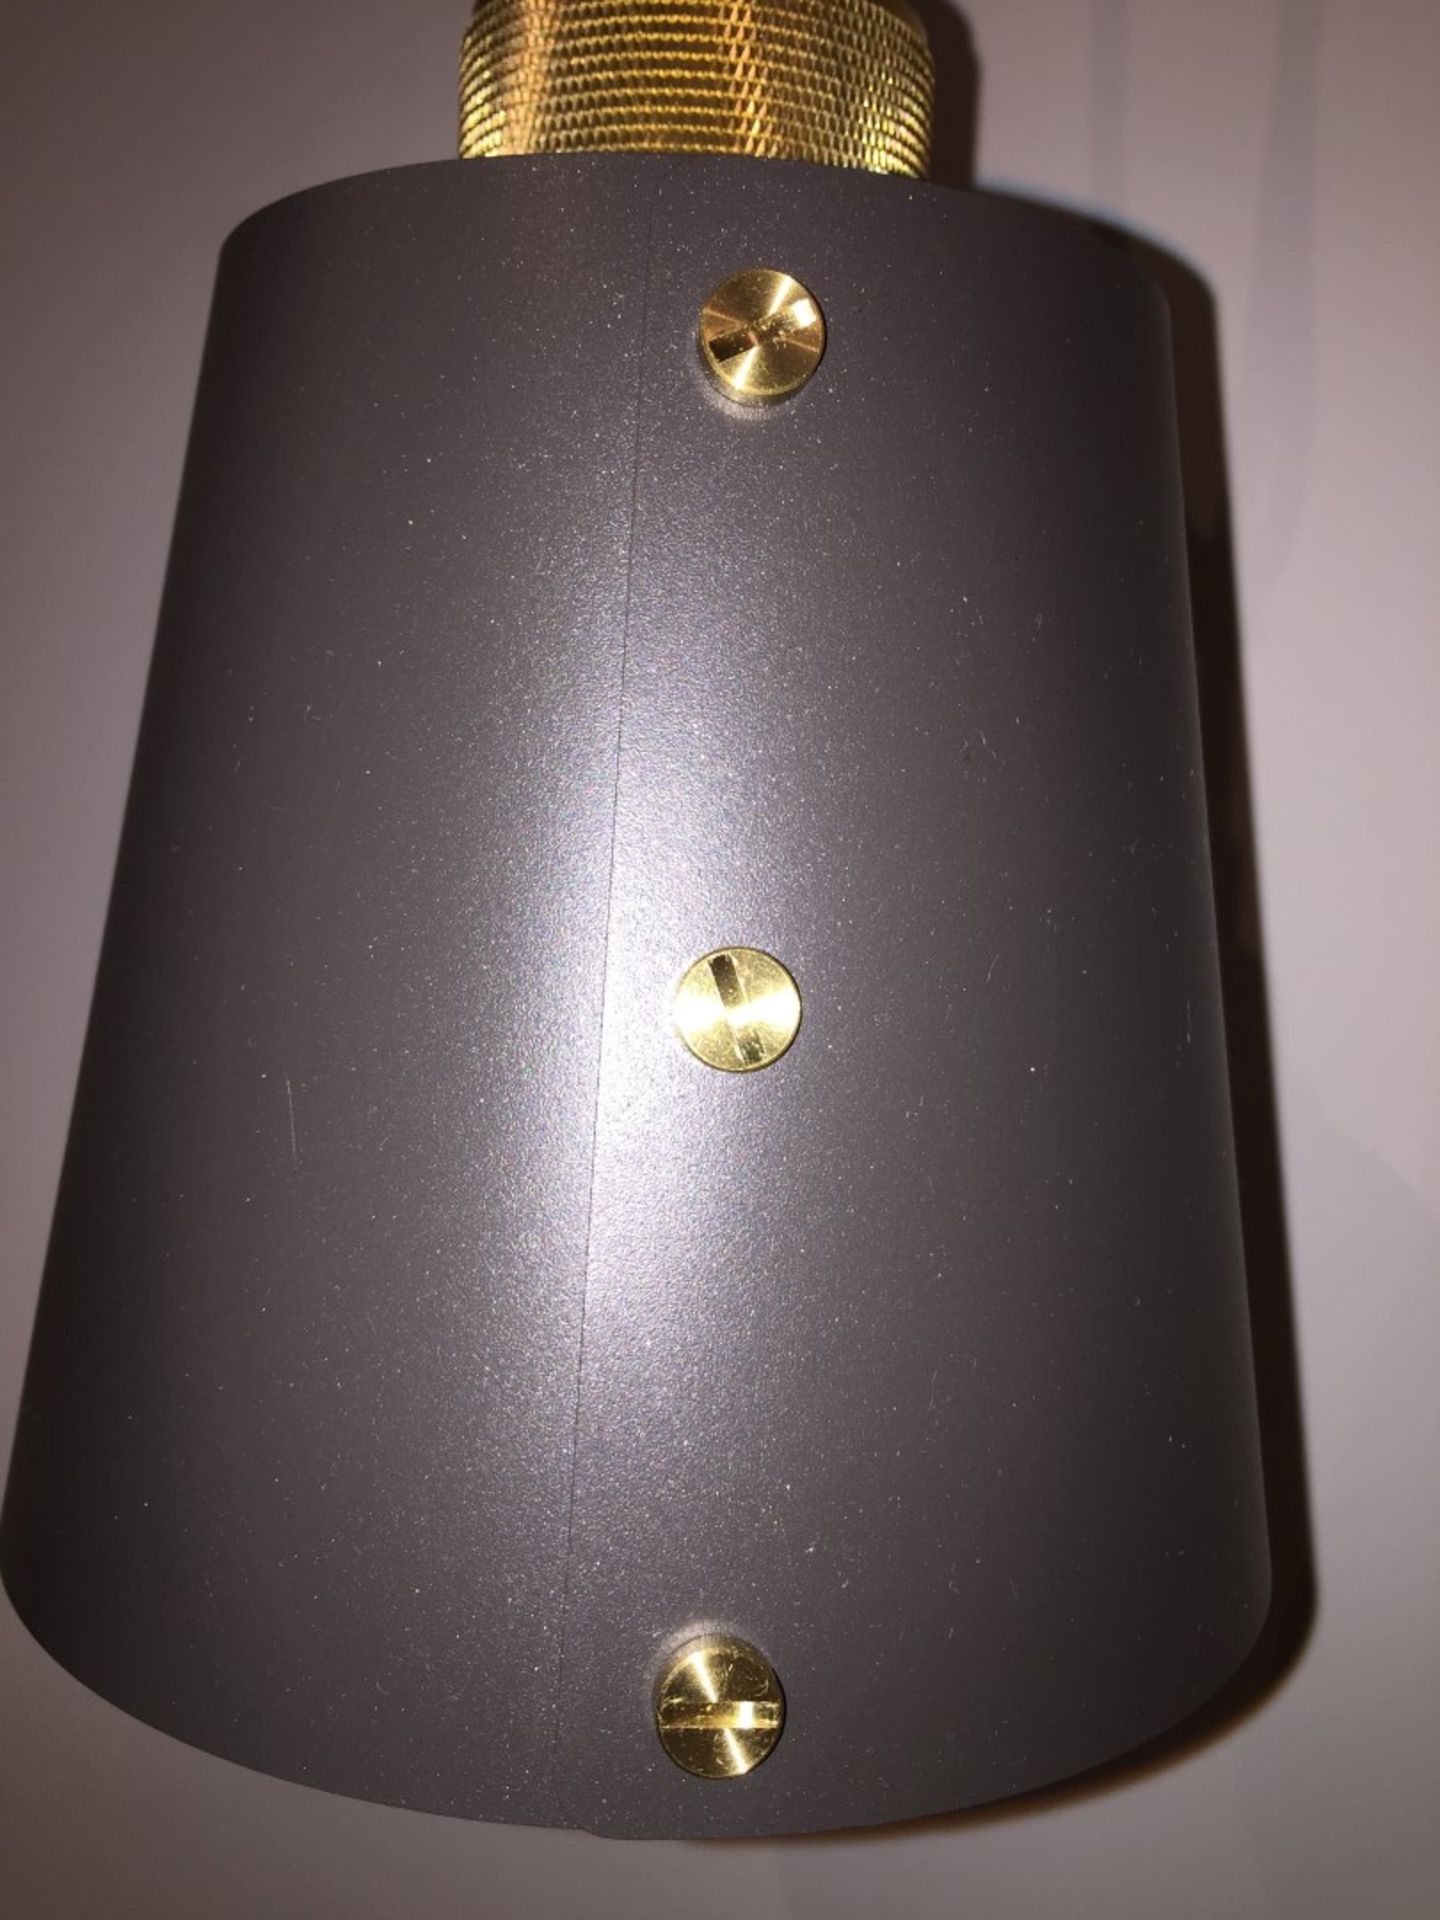 1 x BUSTER + PUNCH Hooked Wall Light With Metal Shade - Ref: WS/FF160A - CL204 - Location: London Ci - Image 8 of 9